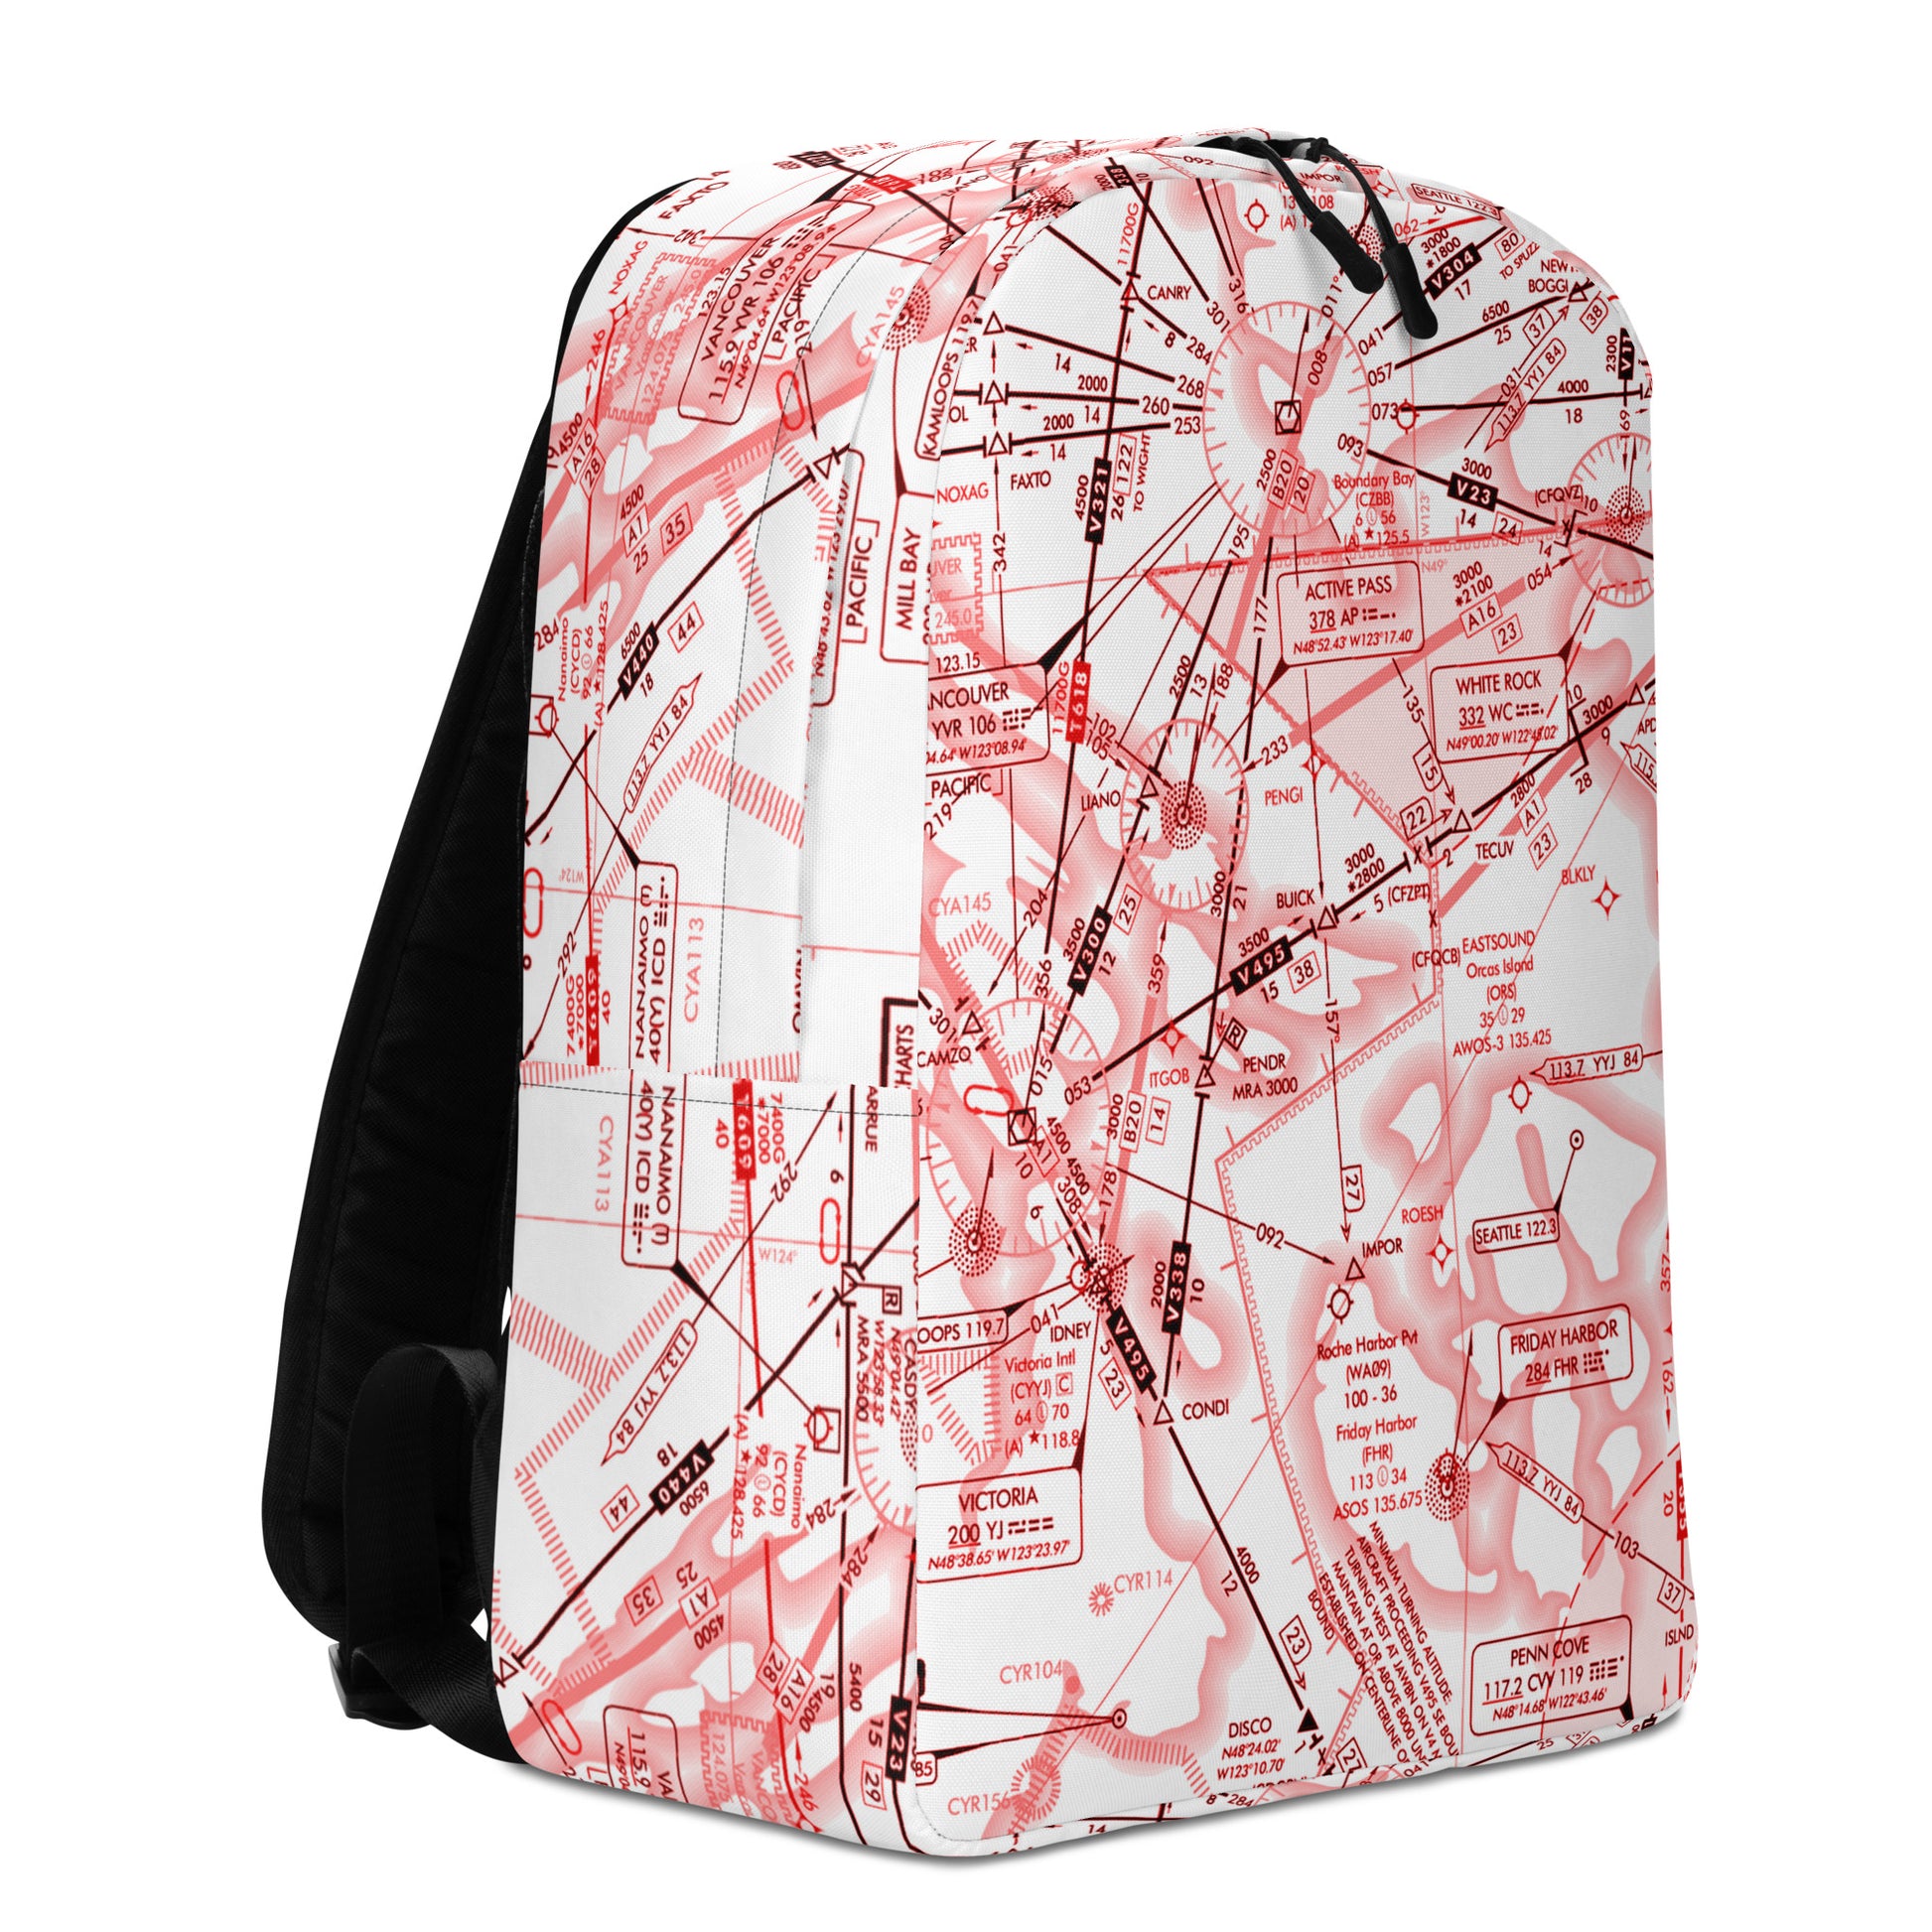 Enroute Low Altitude (ELUS1) Minimalist Backpack (red&white)